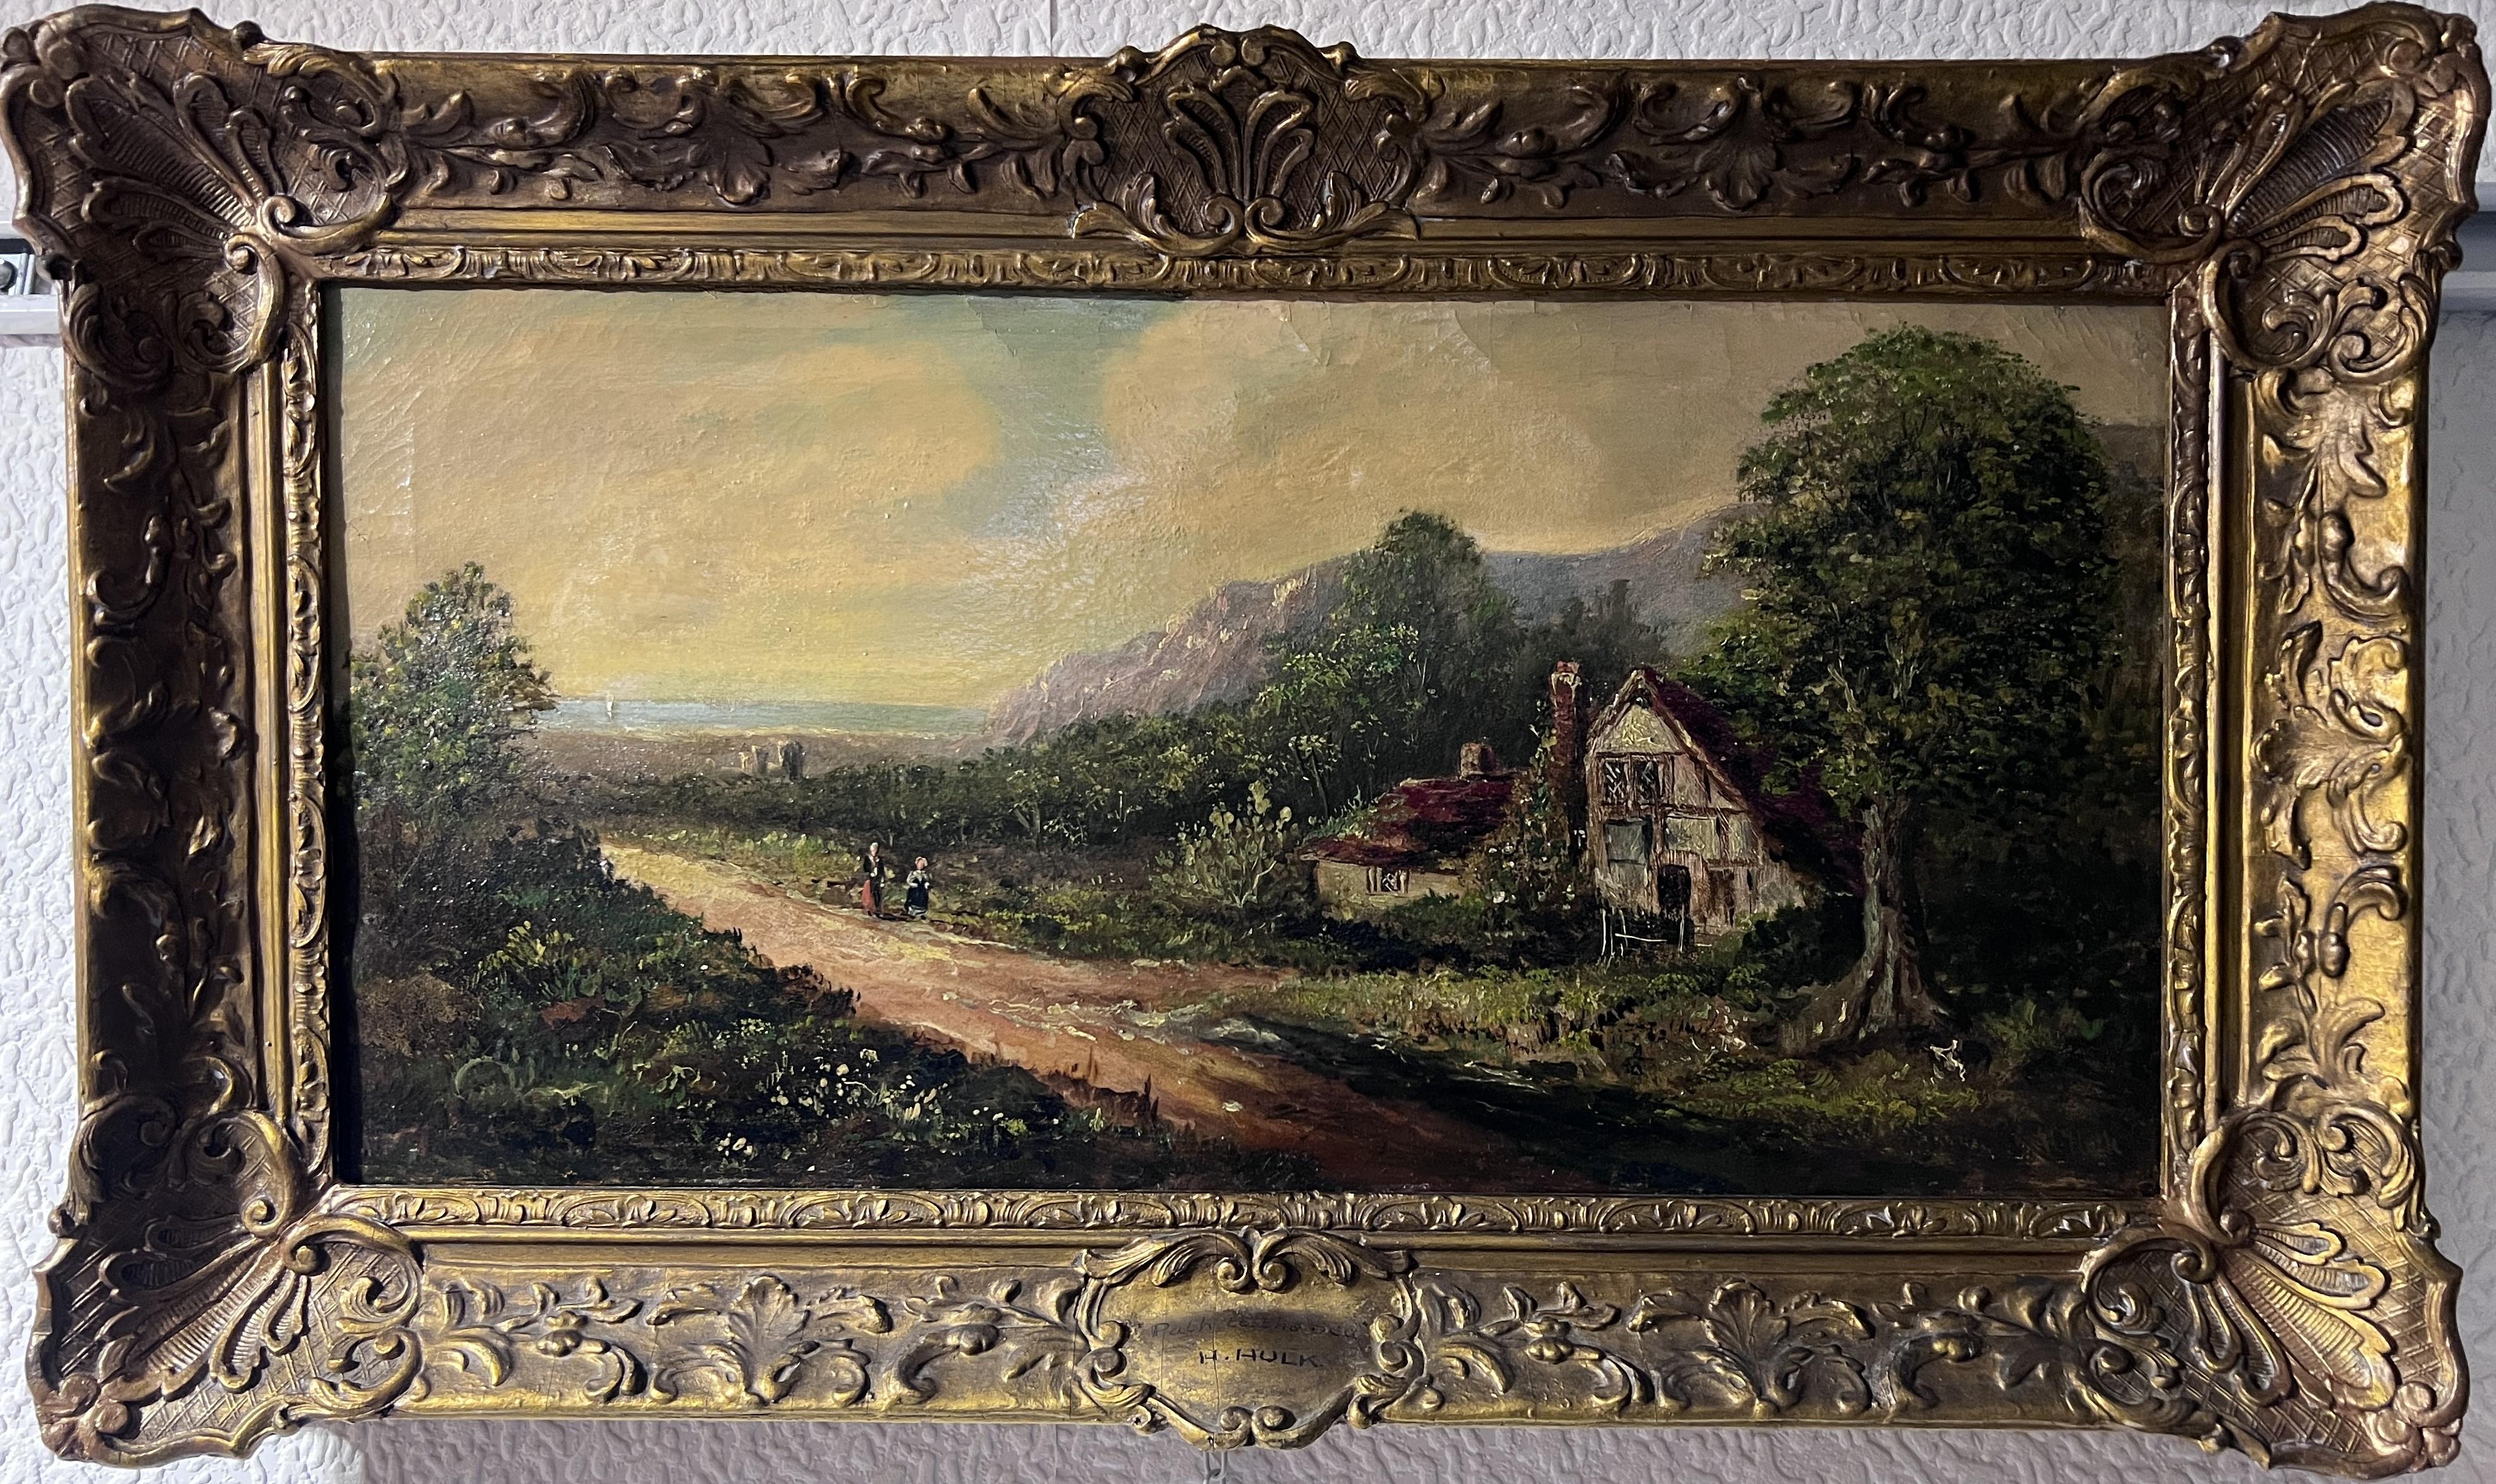 This is a lovely antique original oil painting on canvas depicting  a classic Dutch rural landscape, highlighting an idyllic country scene that is both tranquil and picturesque. It features a central dirt path leading towards the horizon, flanked by